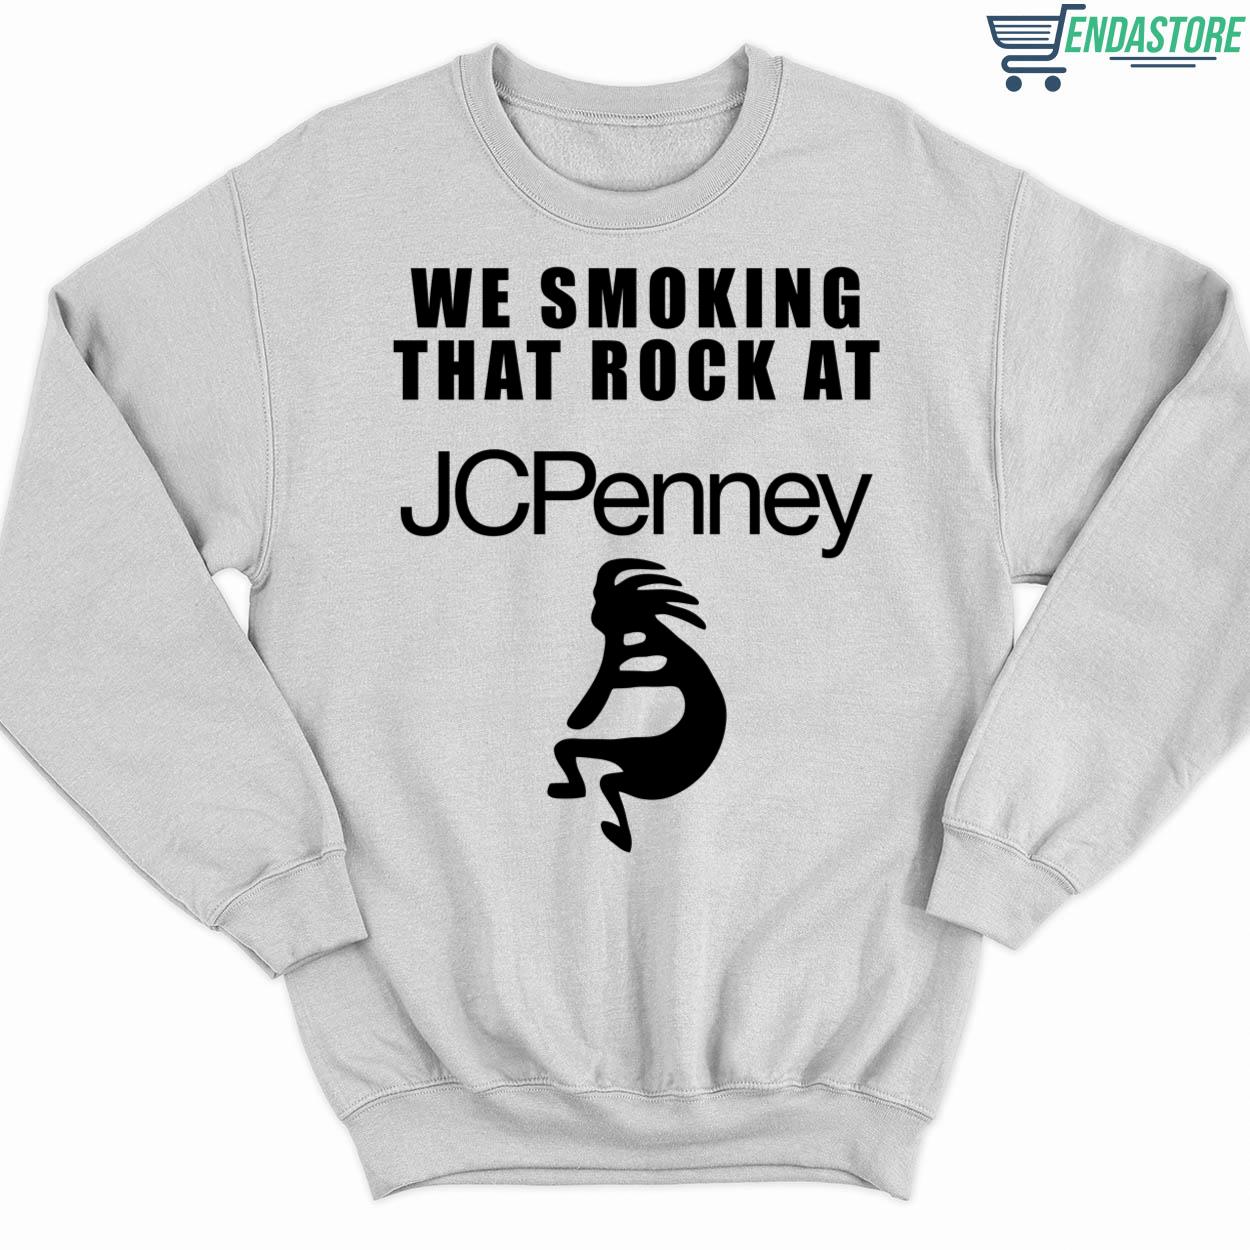 Endastore We Smoking That Rock at Jcpenney Hoodie